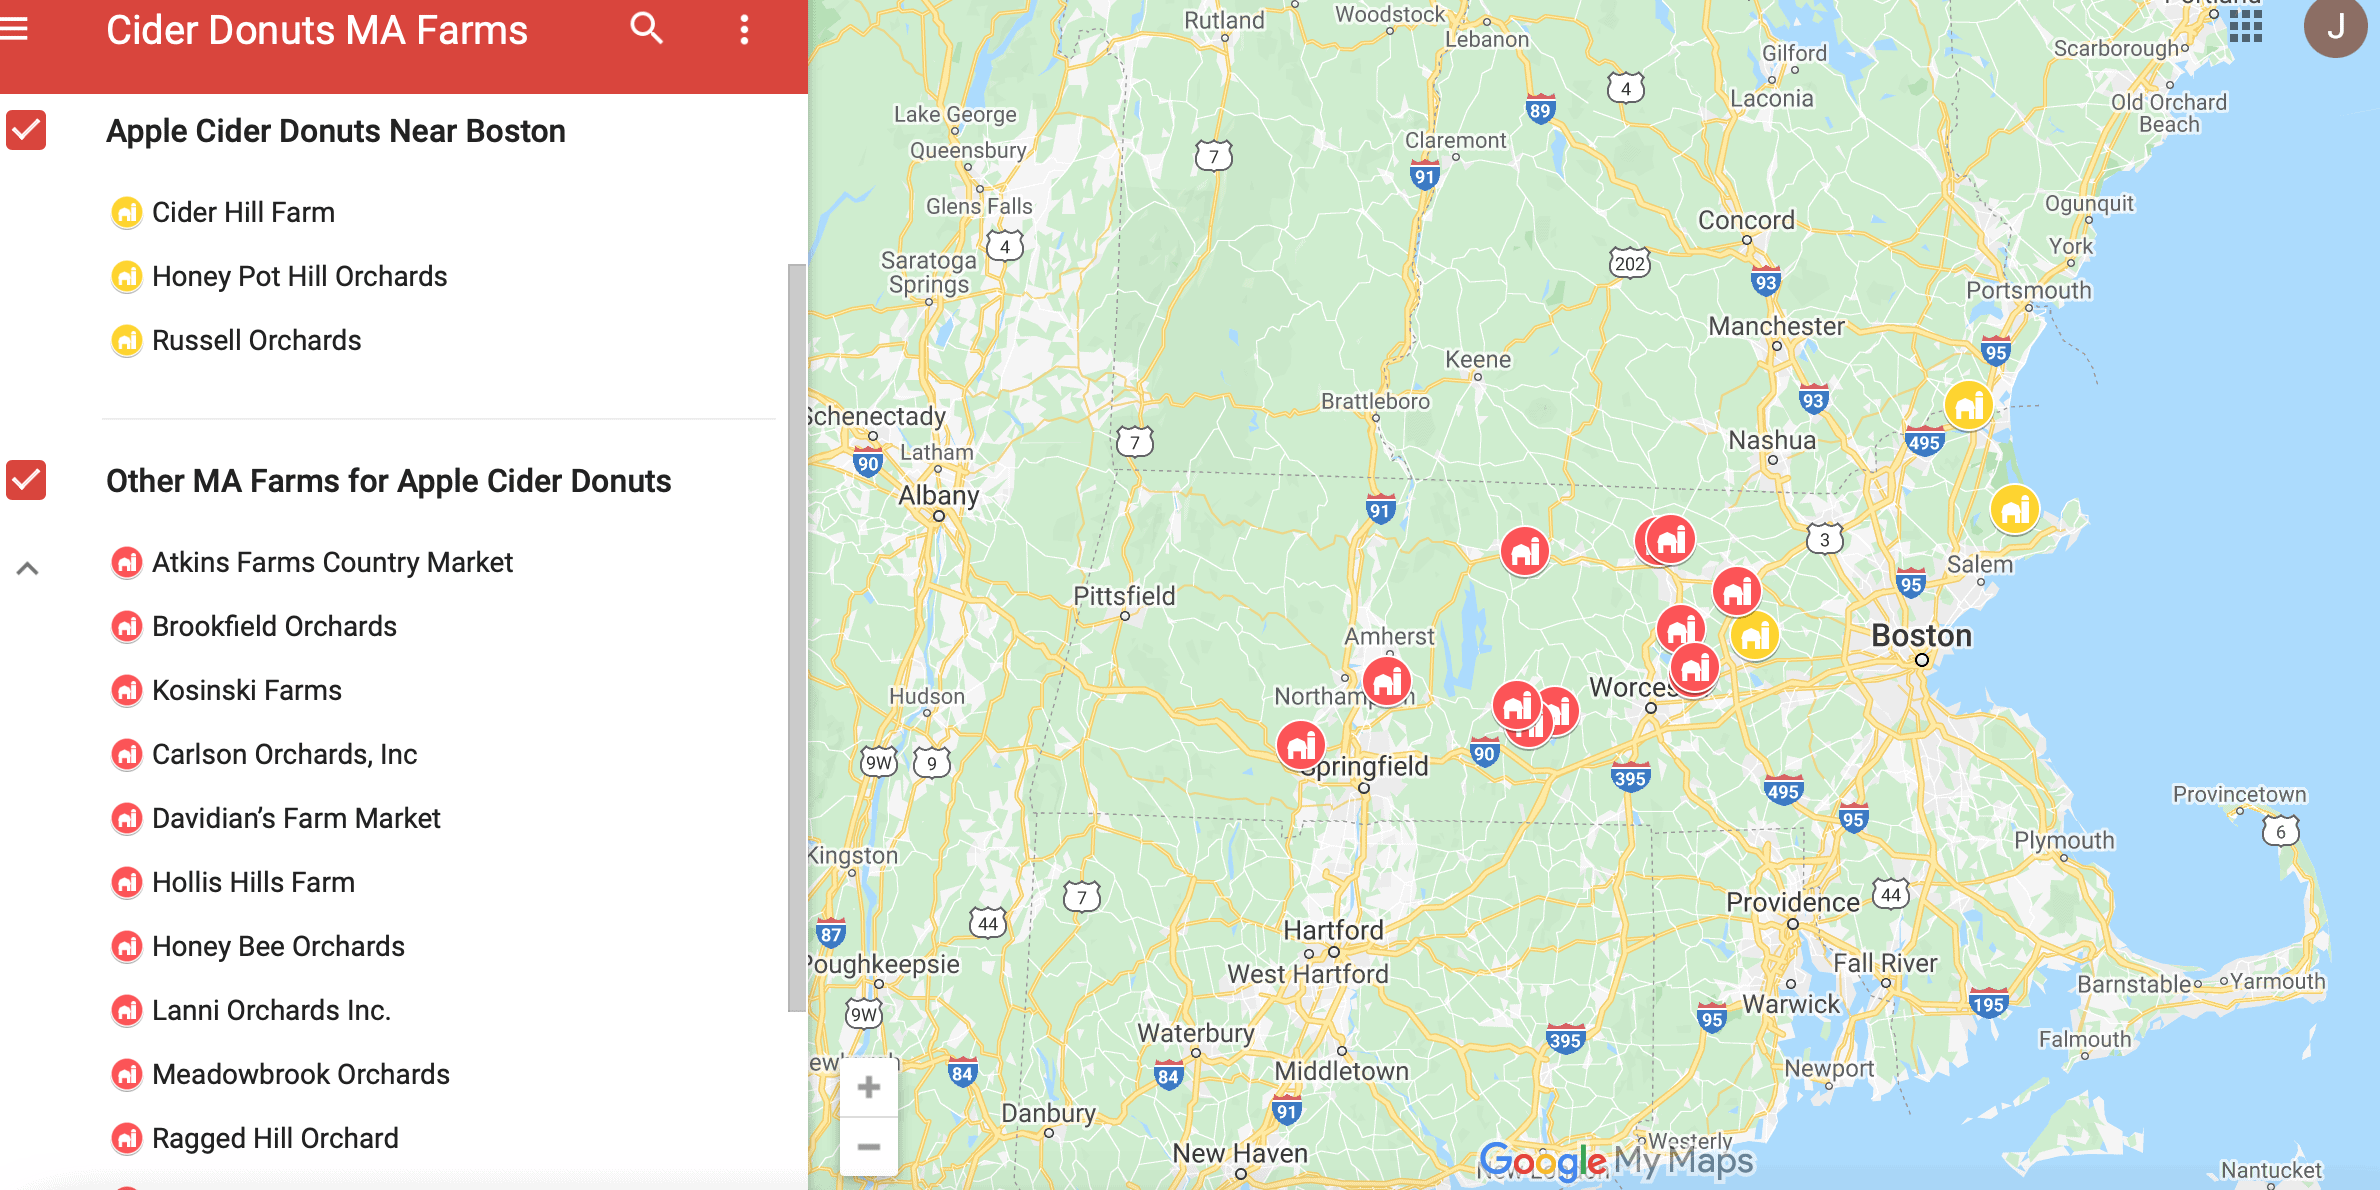 map of apple cider donuts that you can get at Massachusetts farms